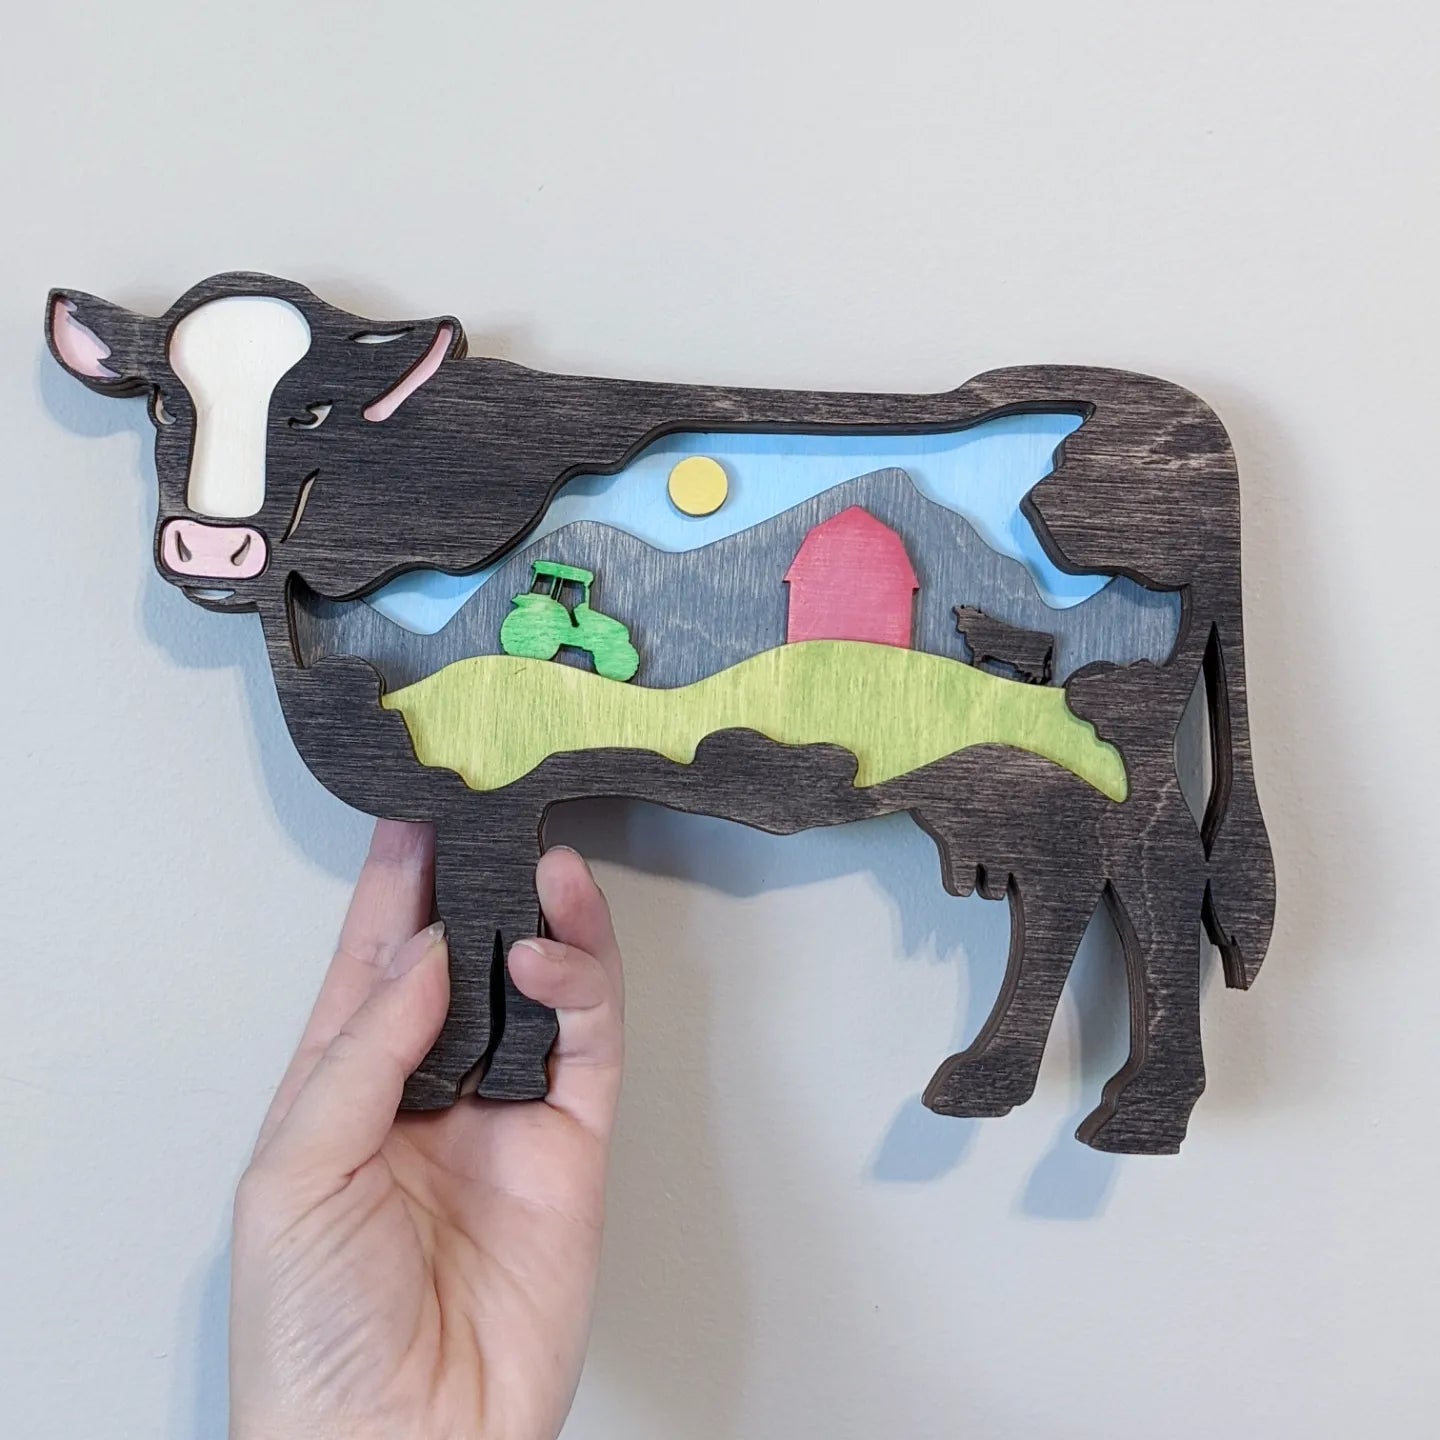 3D Layered Wooden Cow Art / Cow shaped layered farm scene Artwork 50.00